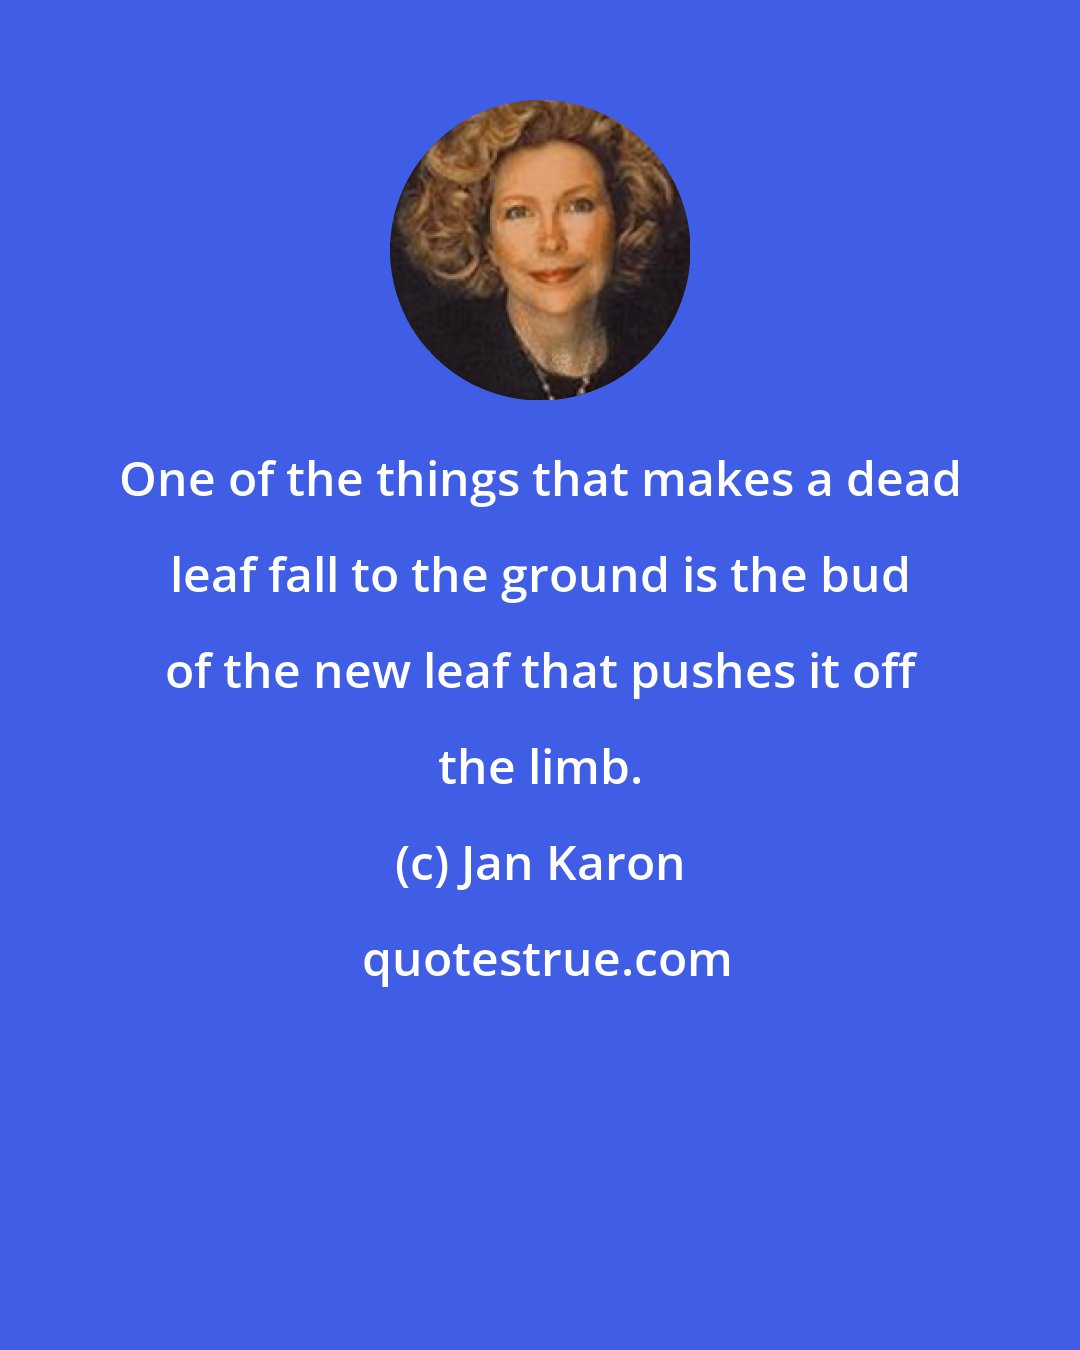 Jan Karon: One of the things that makes a dead leaf fall to the ground is the bud of the new leaf that pushes it off the limb.